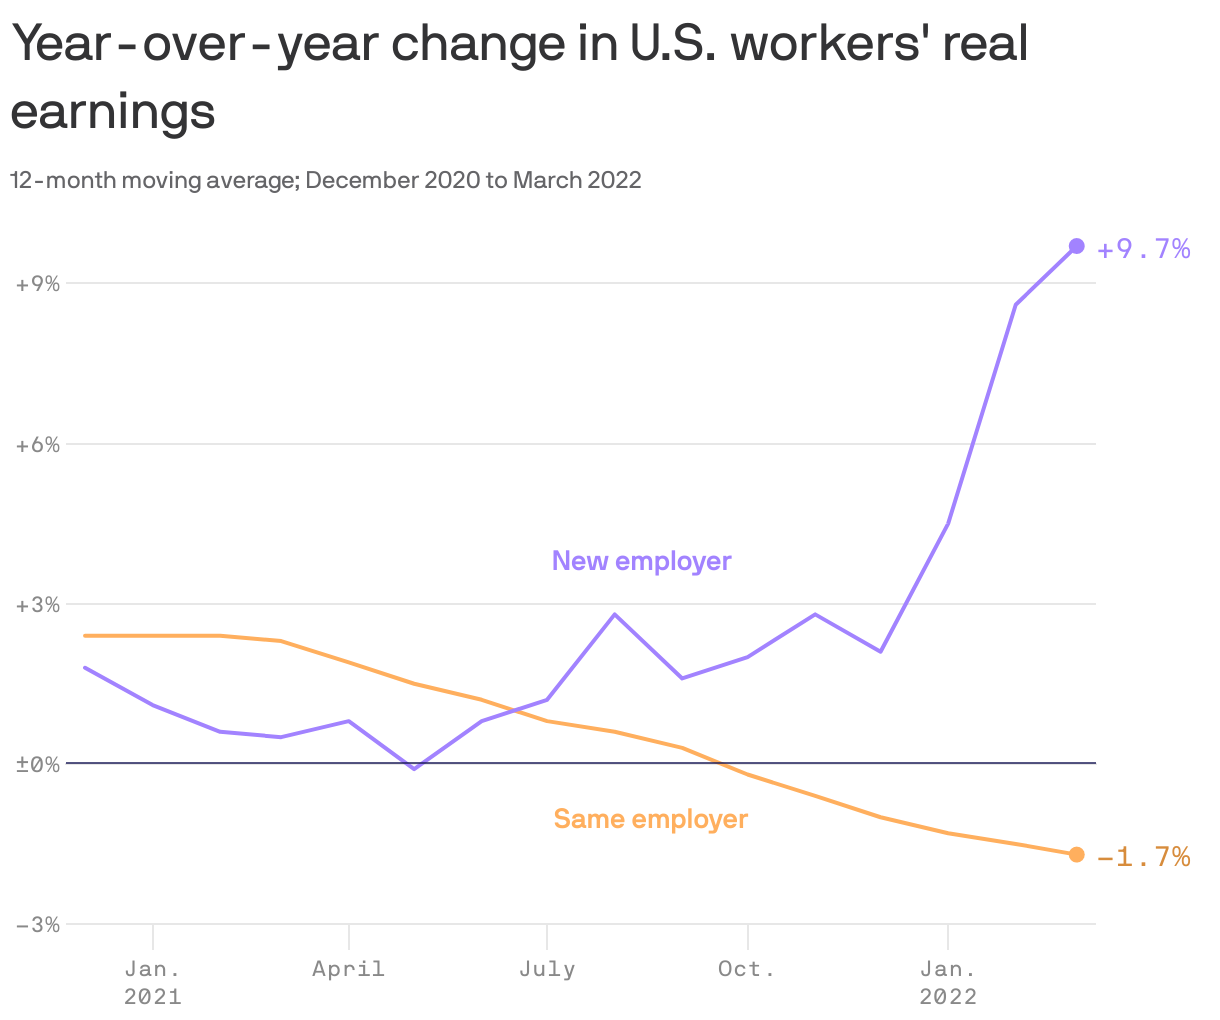 Year-over-year change in U.S. workers' real earnings